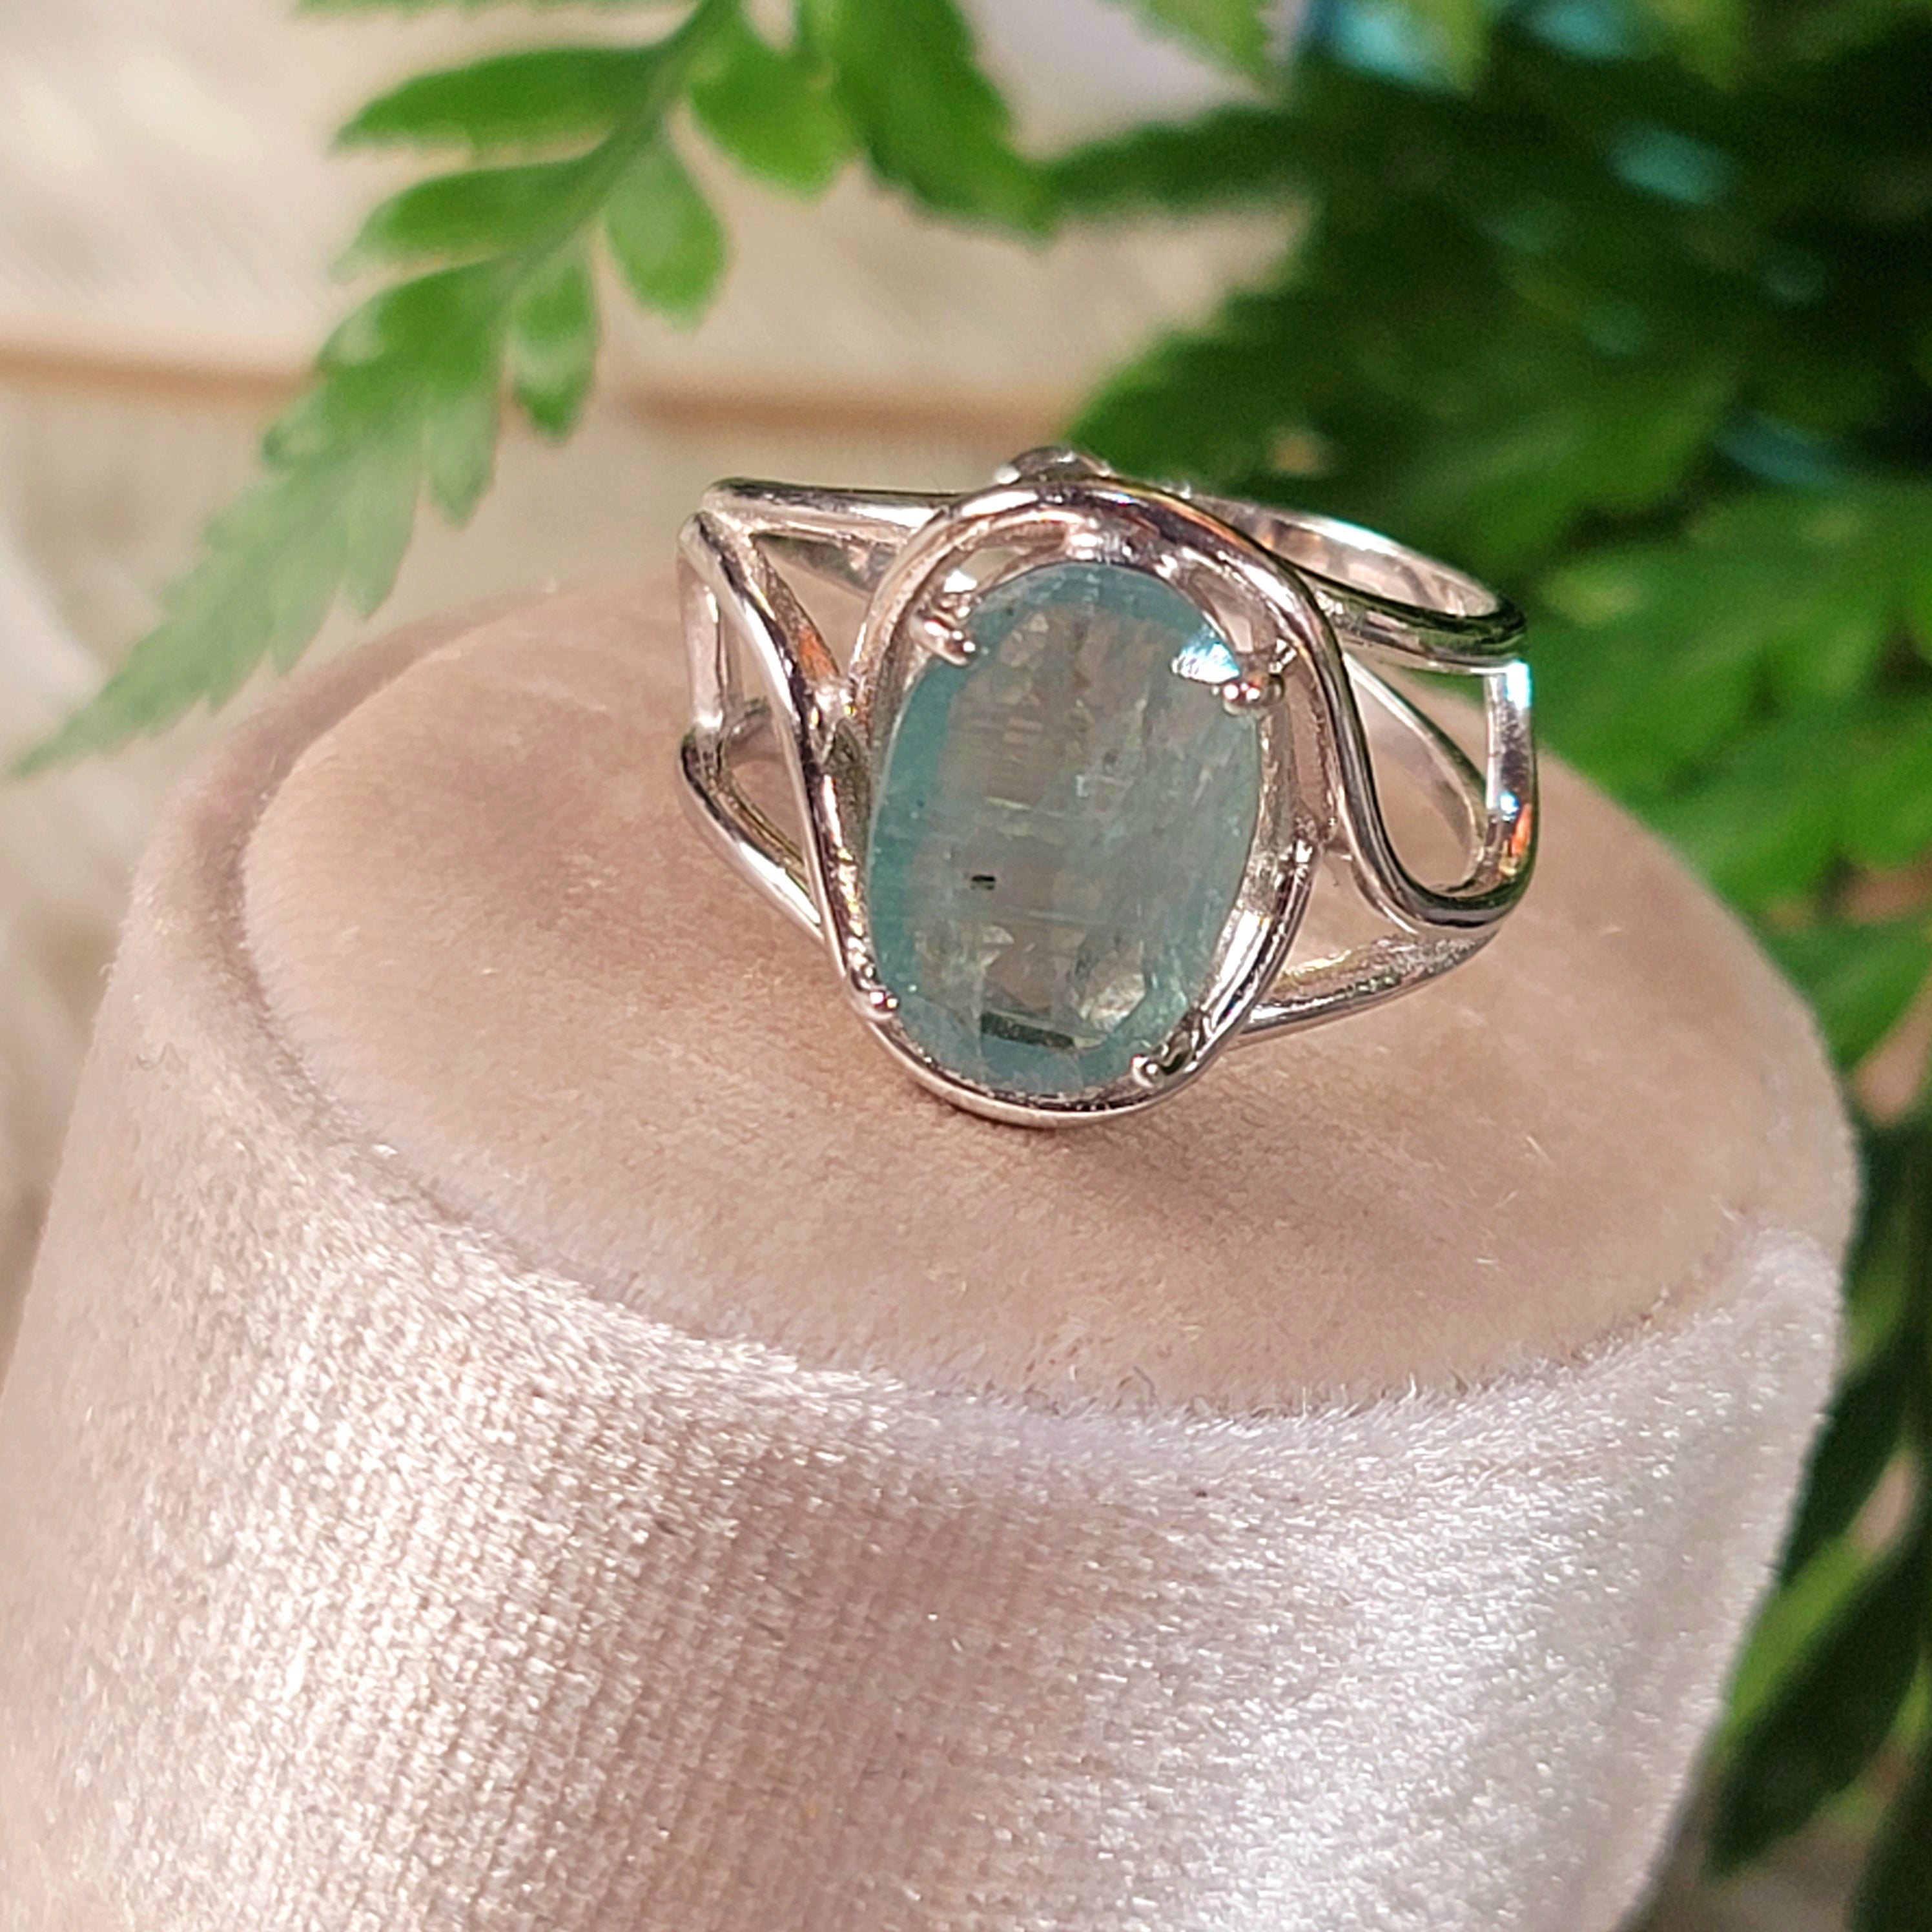 Green Kyanite Finger Cuff Adjustable Ring .925 Silver for Alignment, Balance and Meditation